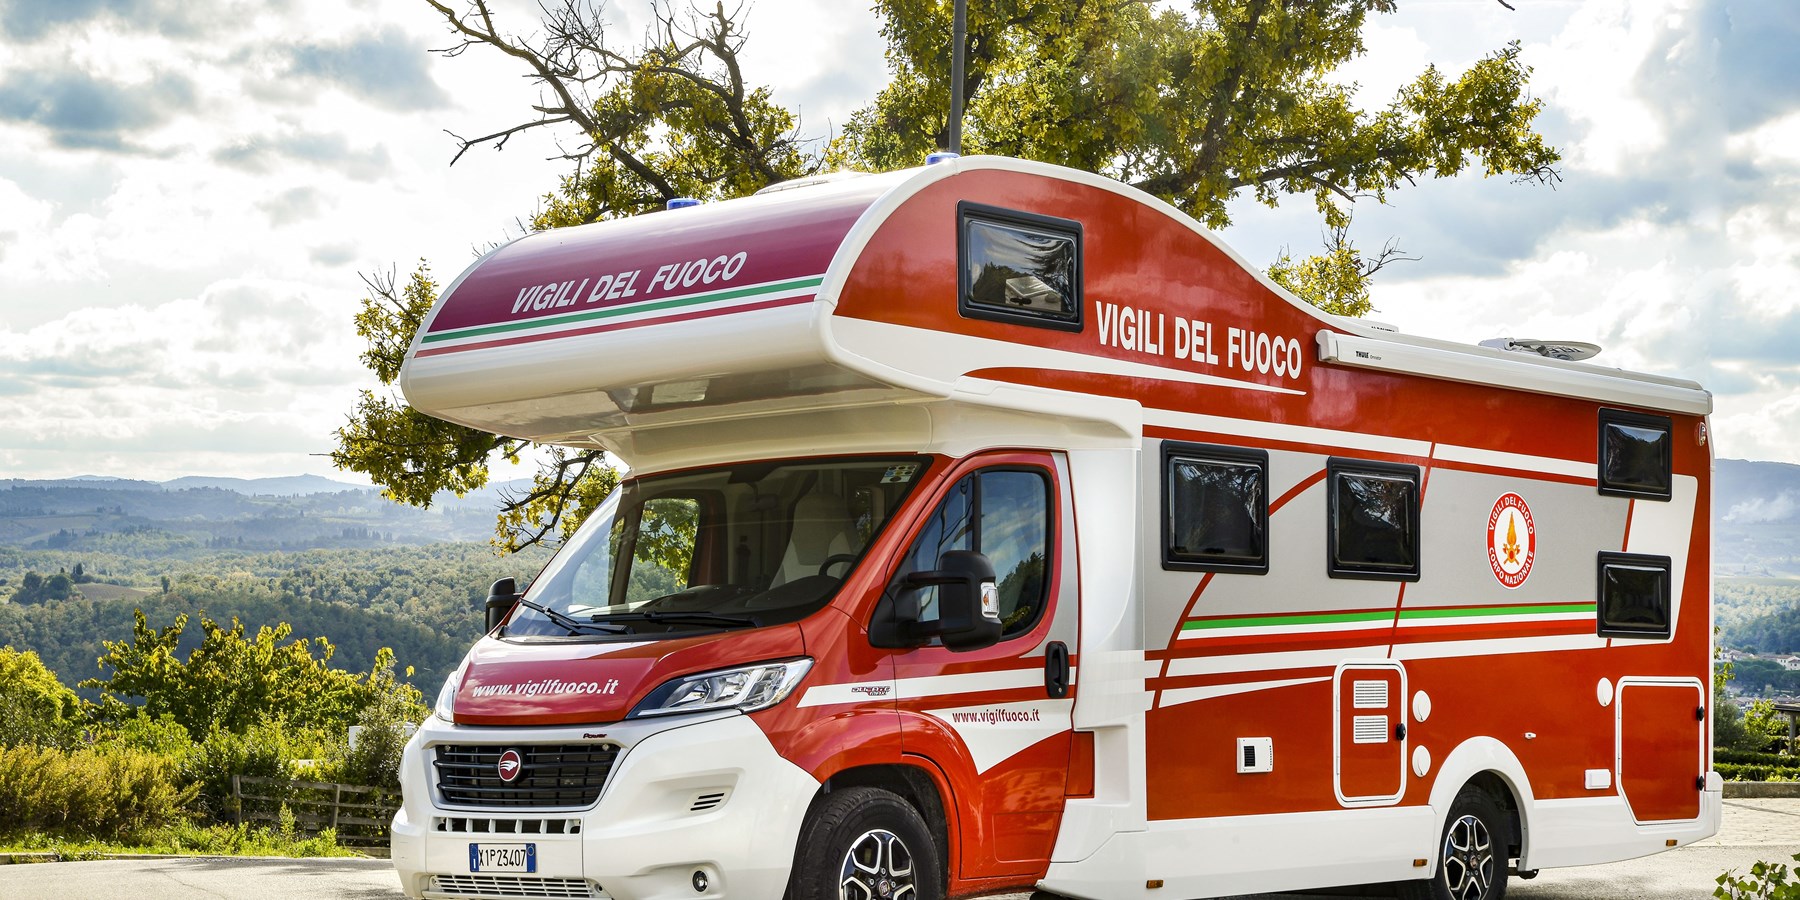 Roller Team has provided the fire brigade with a fully customised overcab motorhome